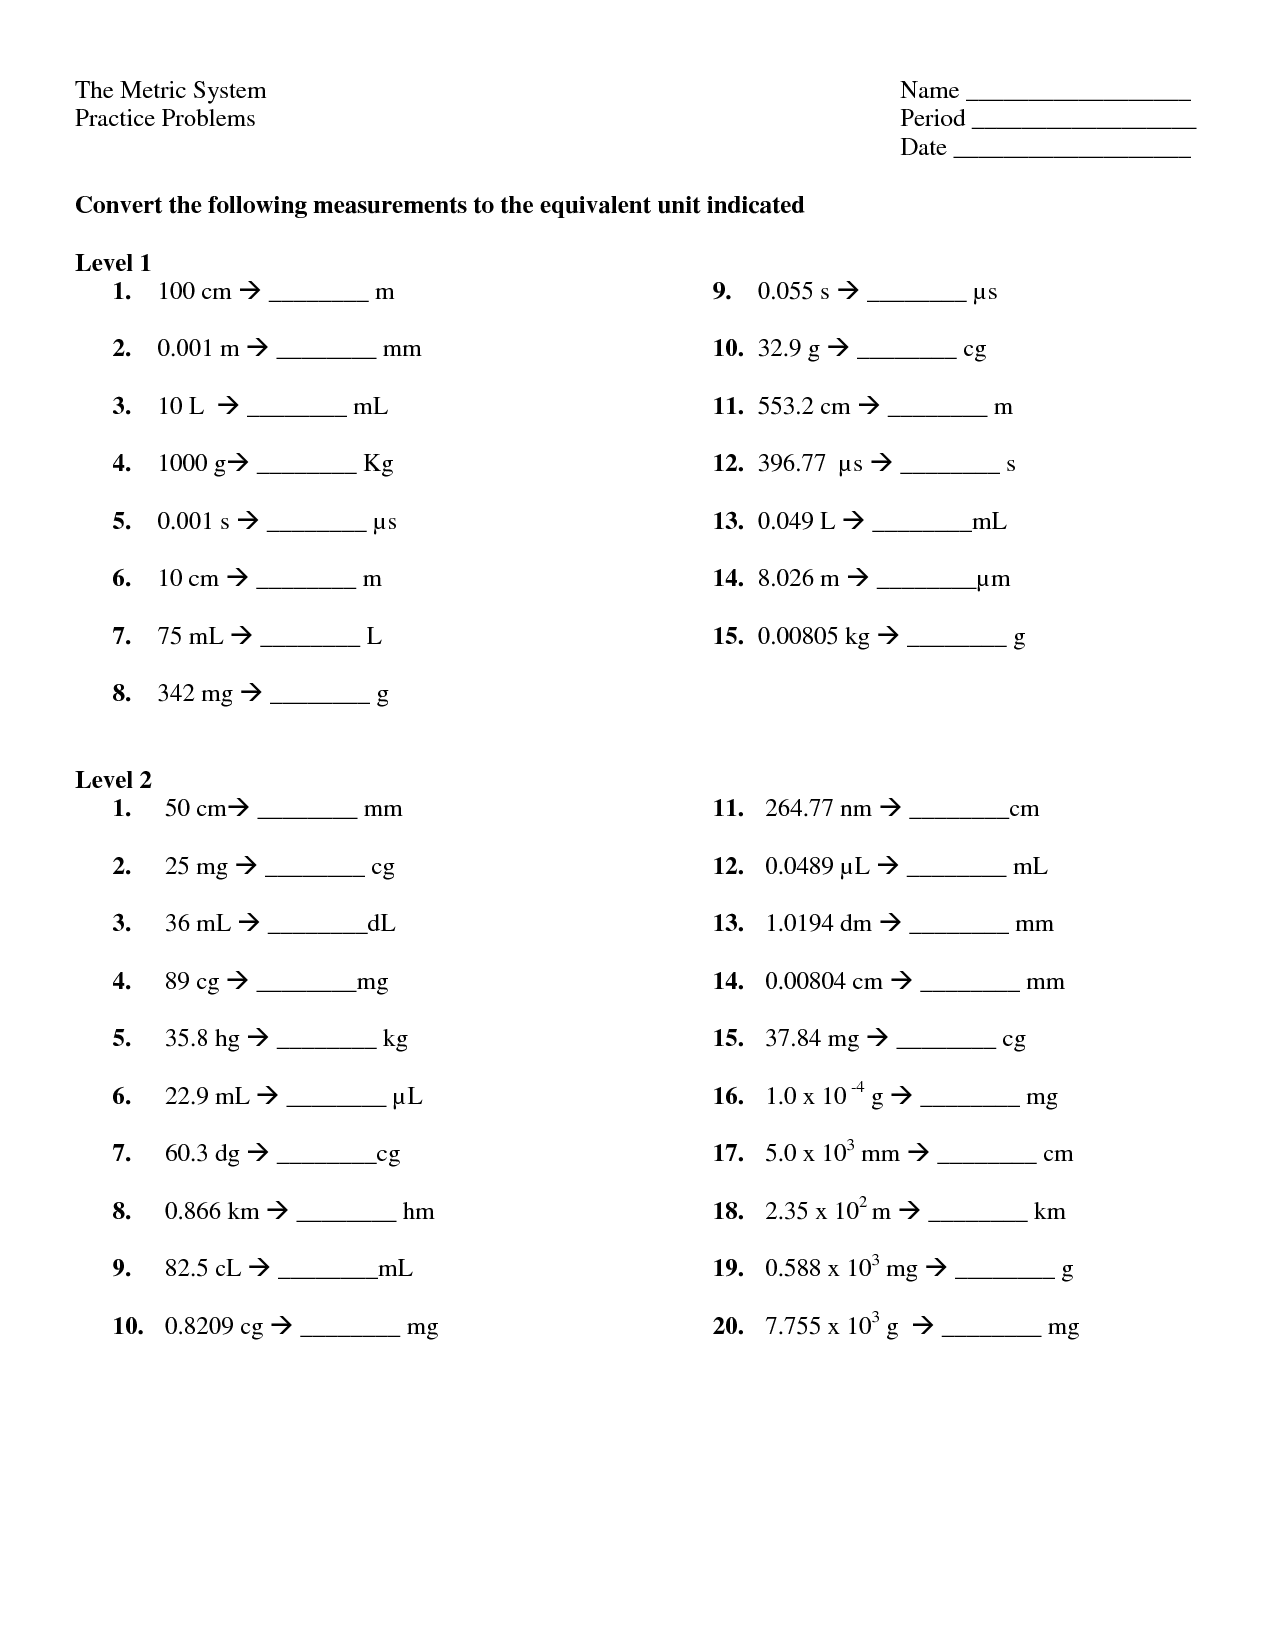 10-best-images-of-weight-conversion-worksheets-worksheeto